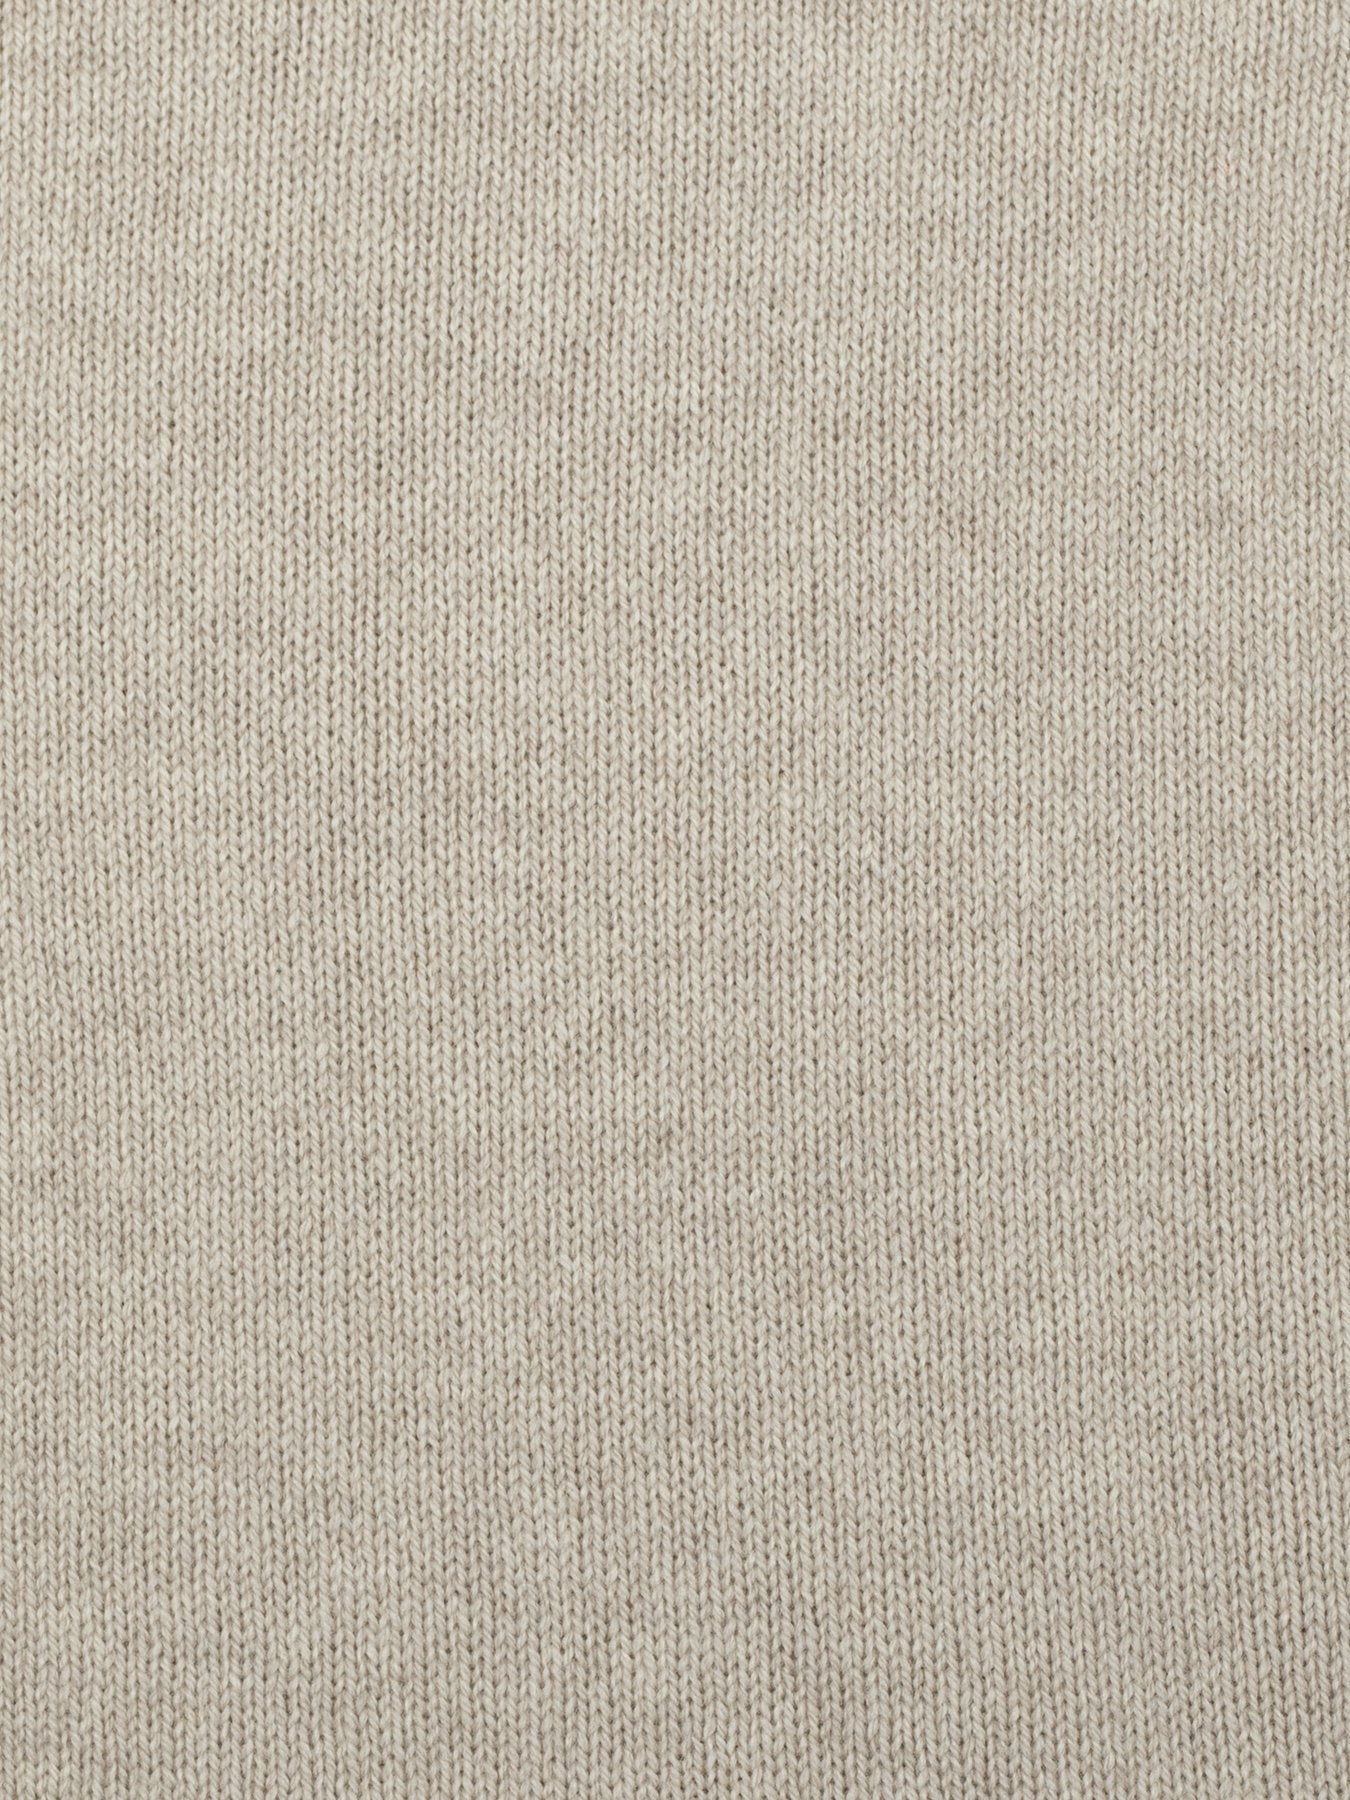 a swatch of plain single jersey knitting made from fine merino wool in a light brown colour